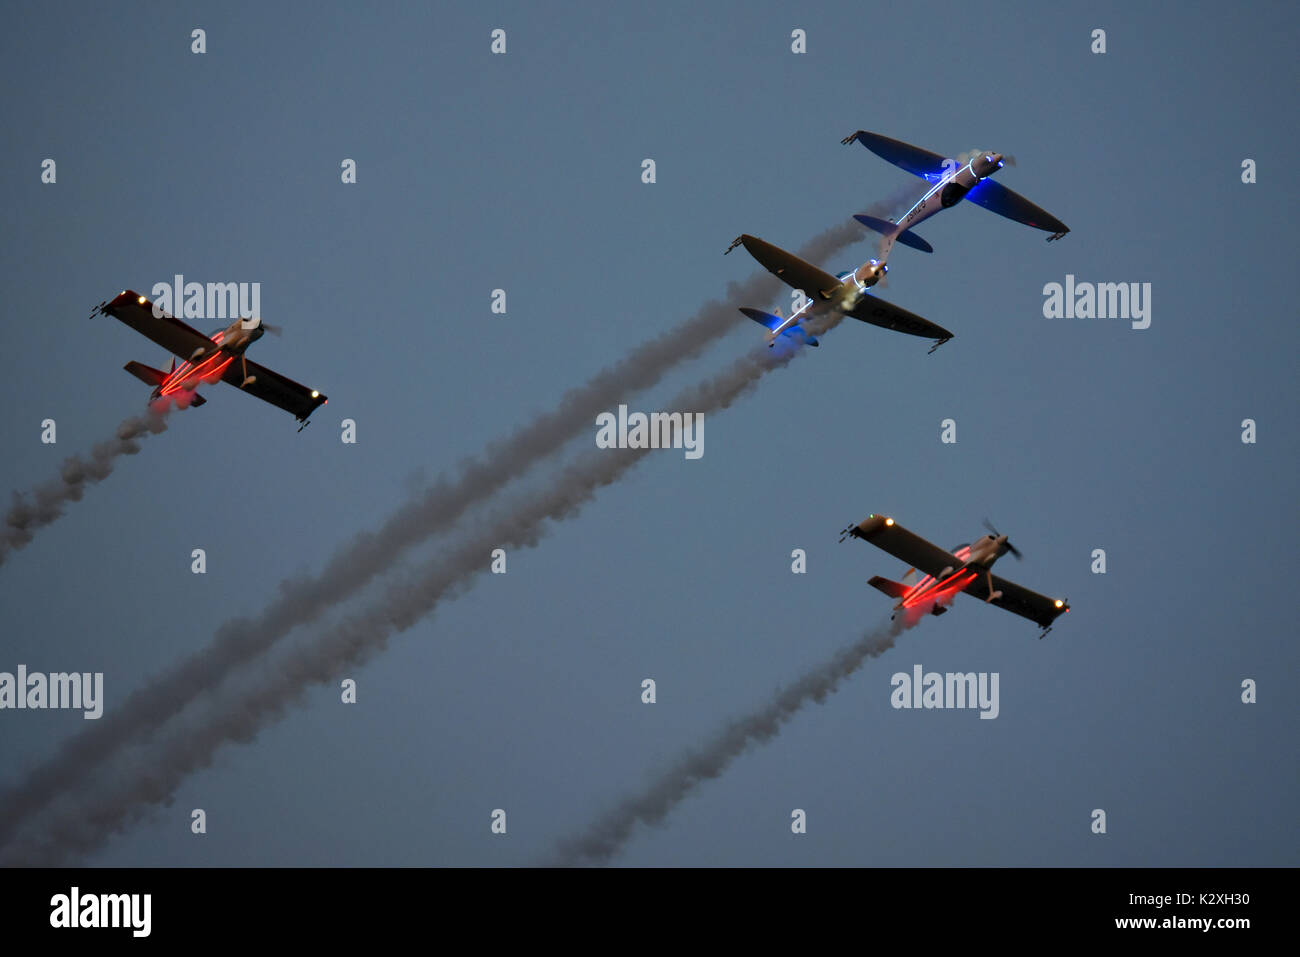 The illuminated Fireflies and Twister aerobatic teams flying together prior to their individual displays in the dusk Clacton Airshow Stock Photo